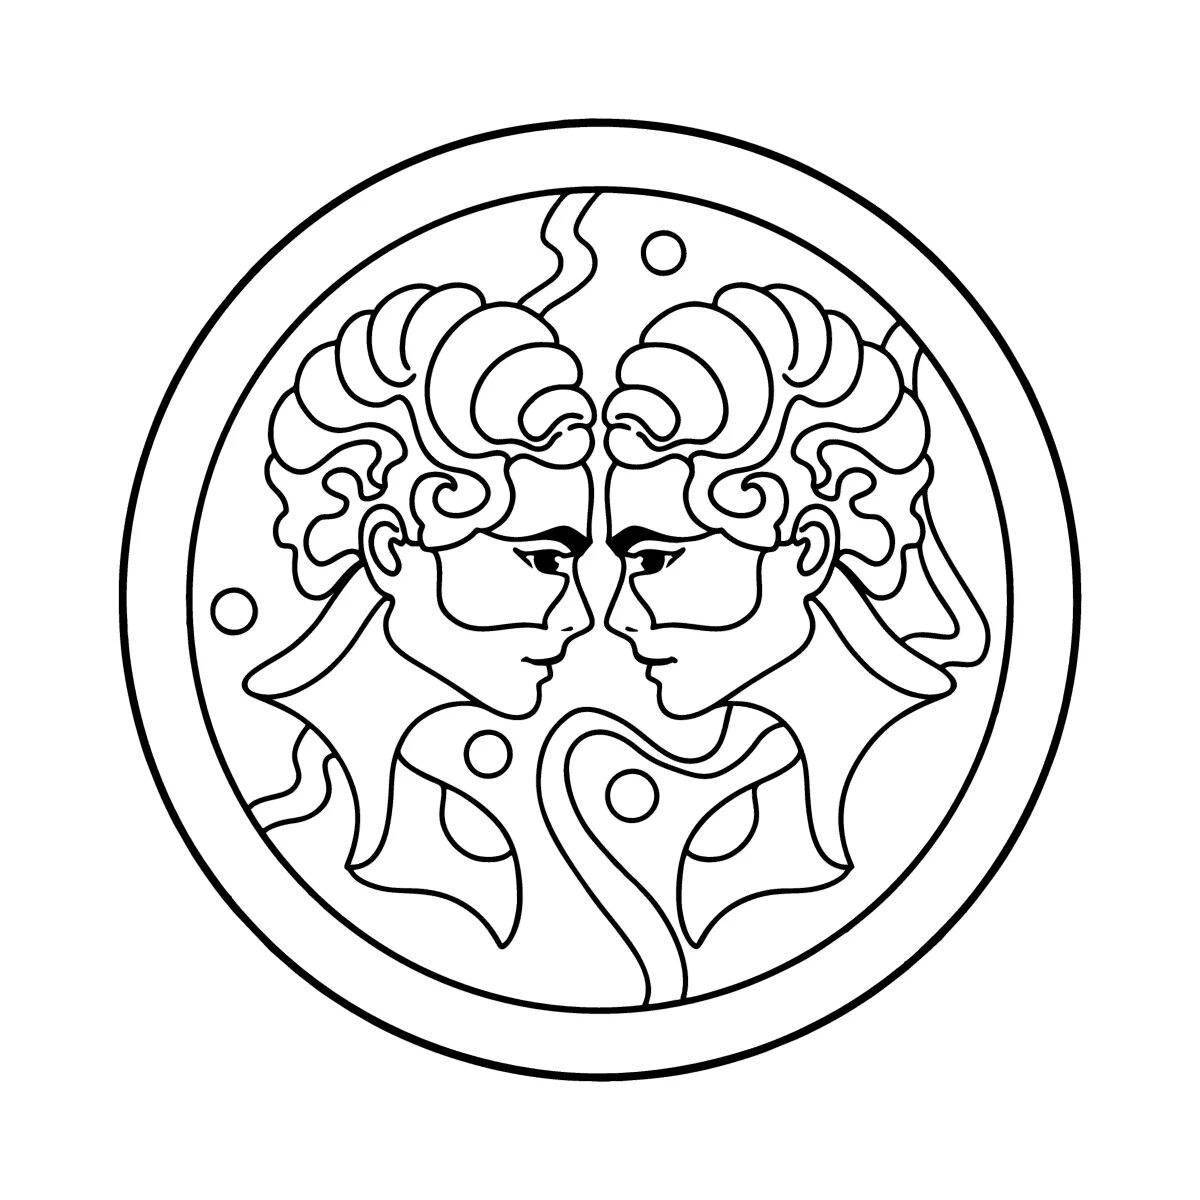 Colorful zodiac signs coloring pages for kids to learn